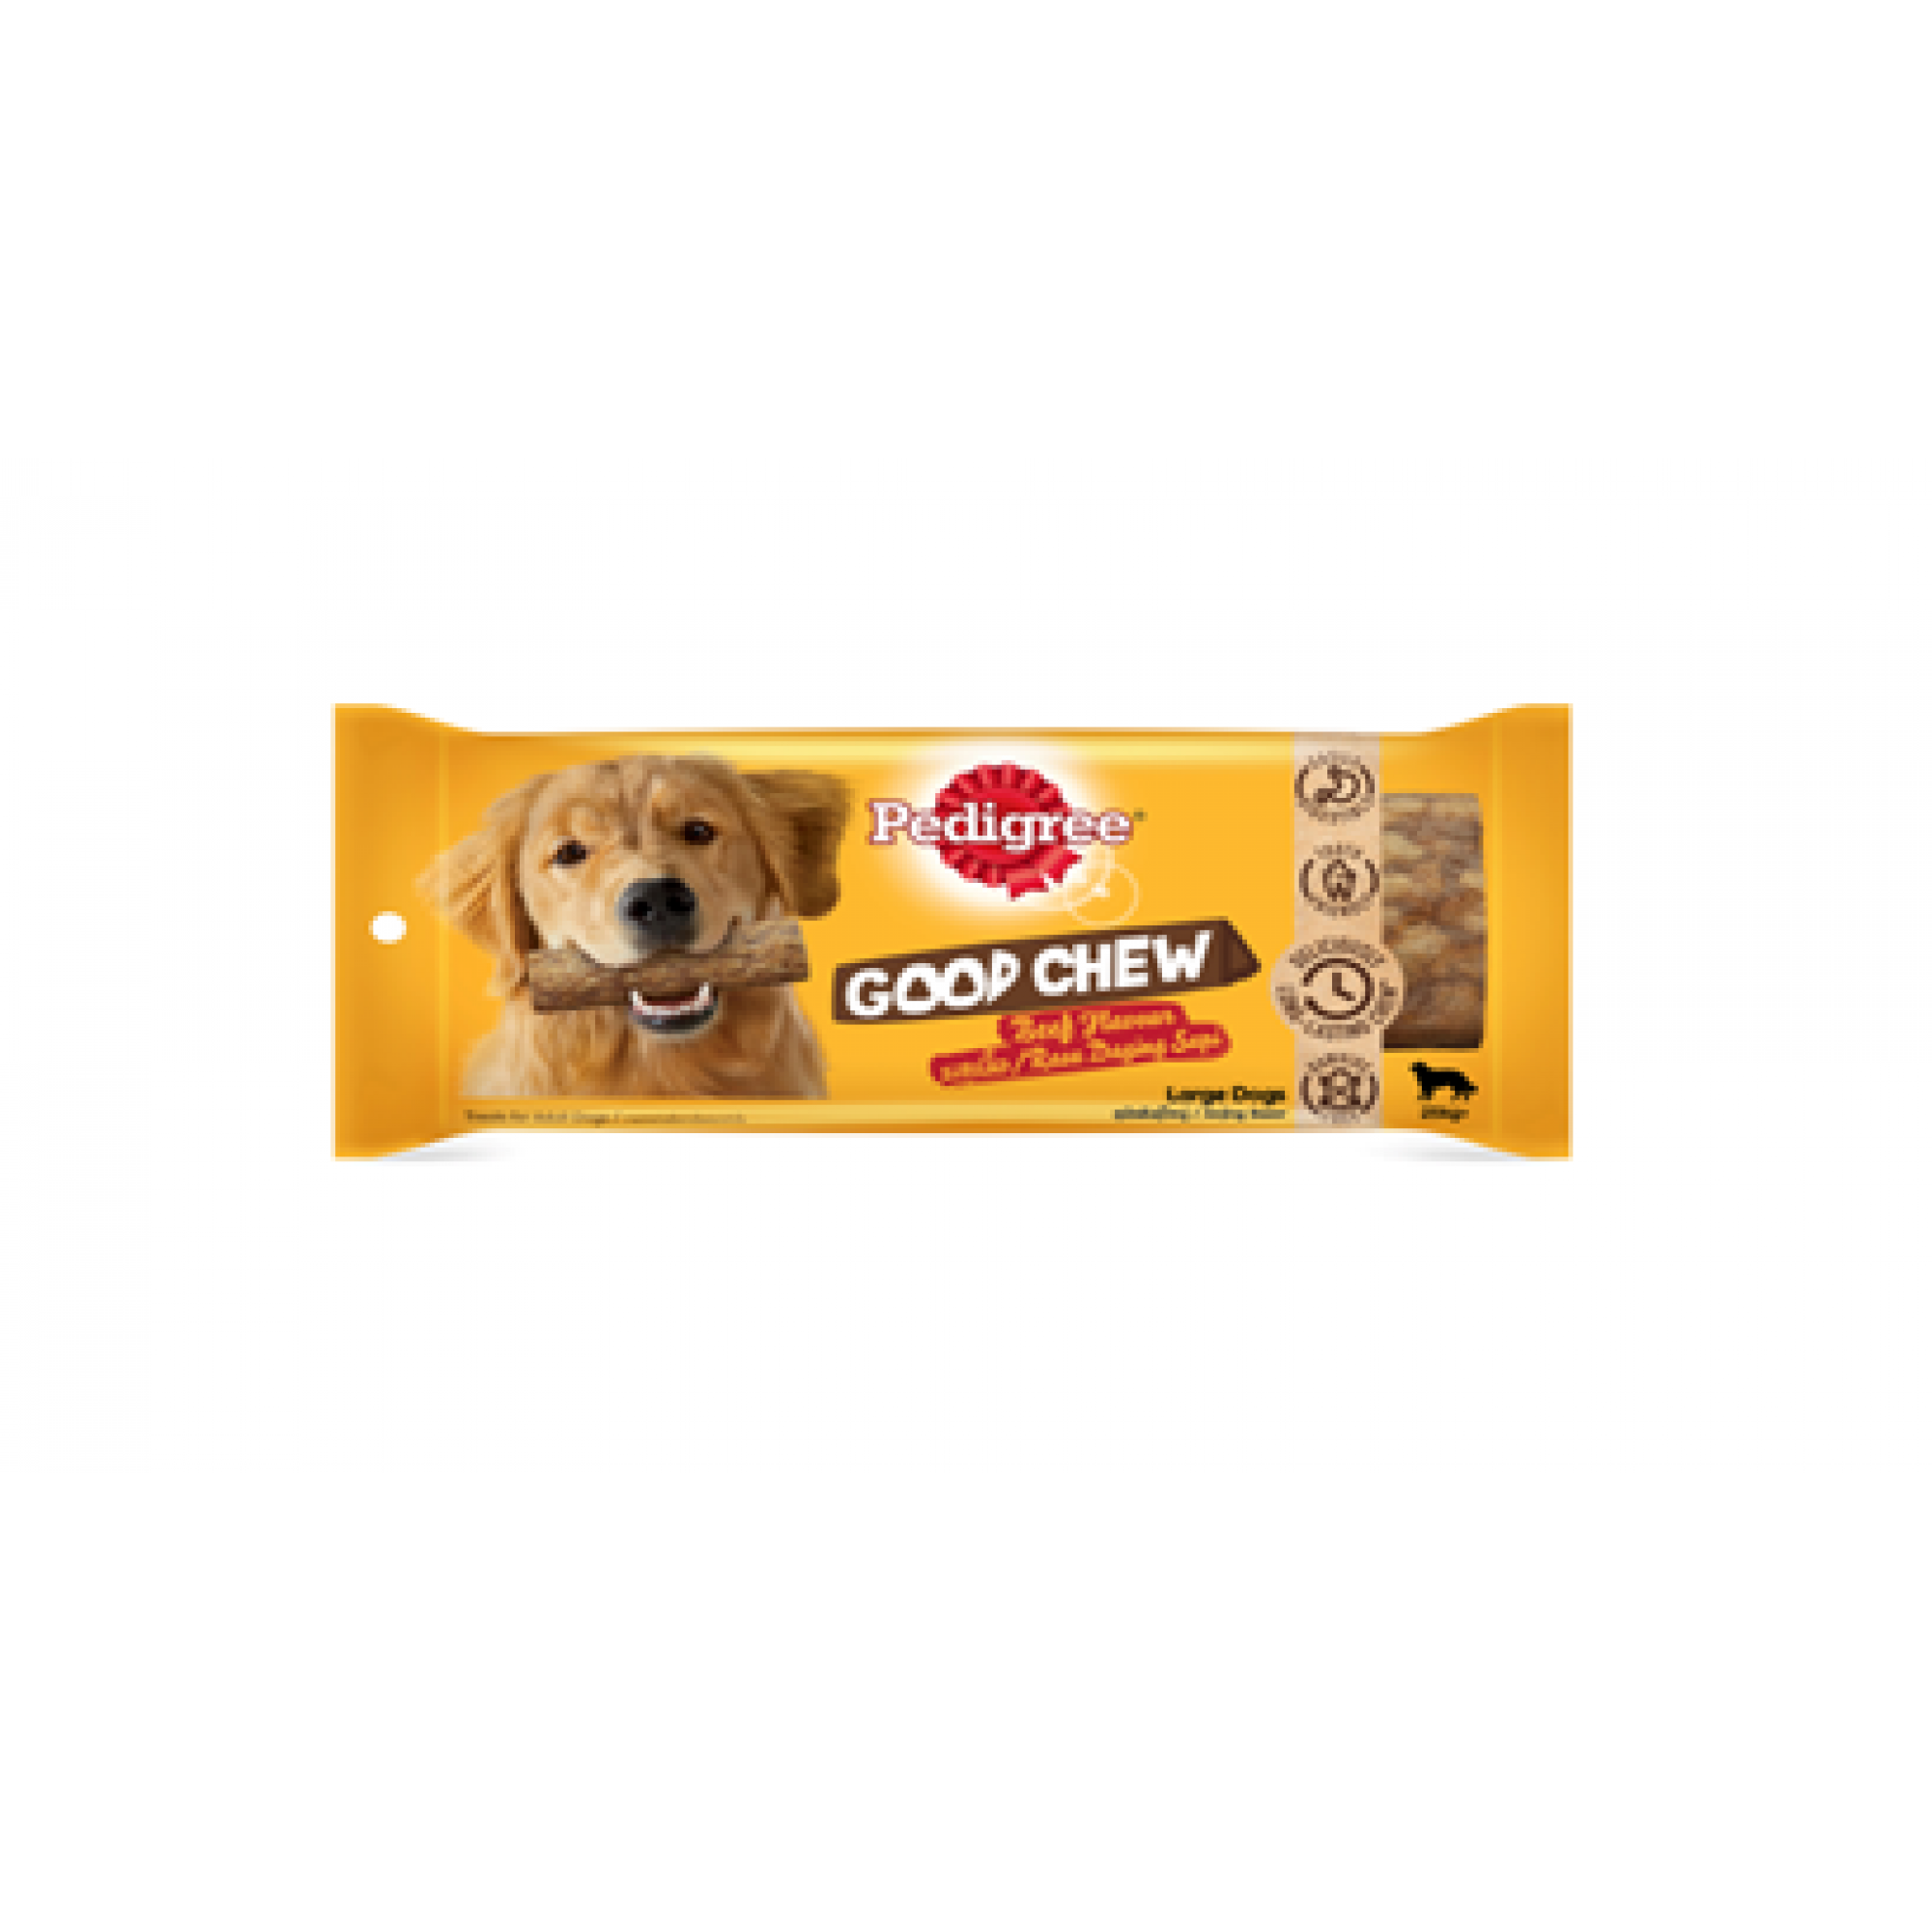 PEDIGREE - Good Chew Large (>25kg) - Beef Flavour 138g